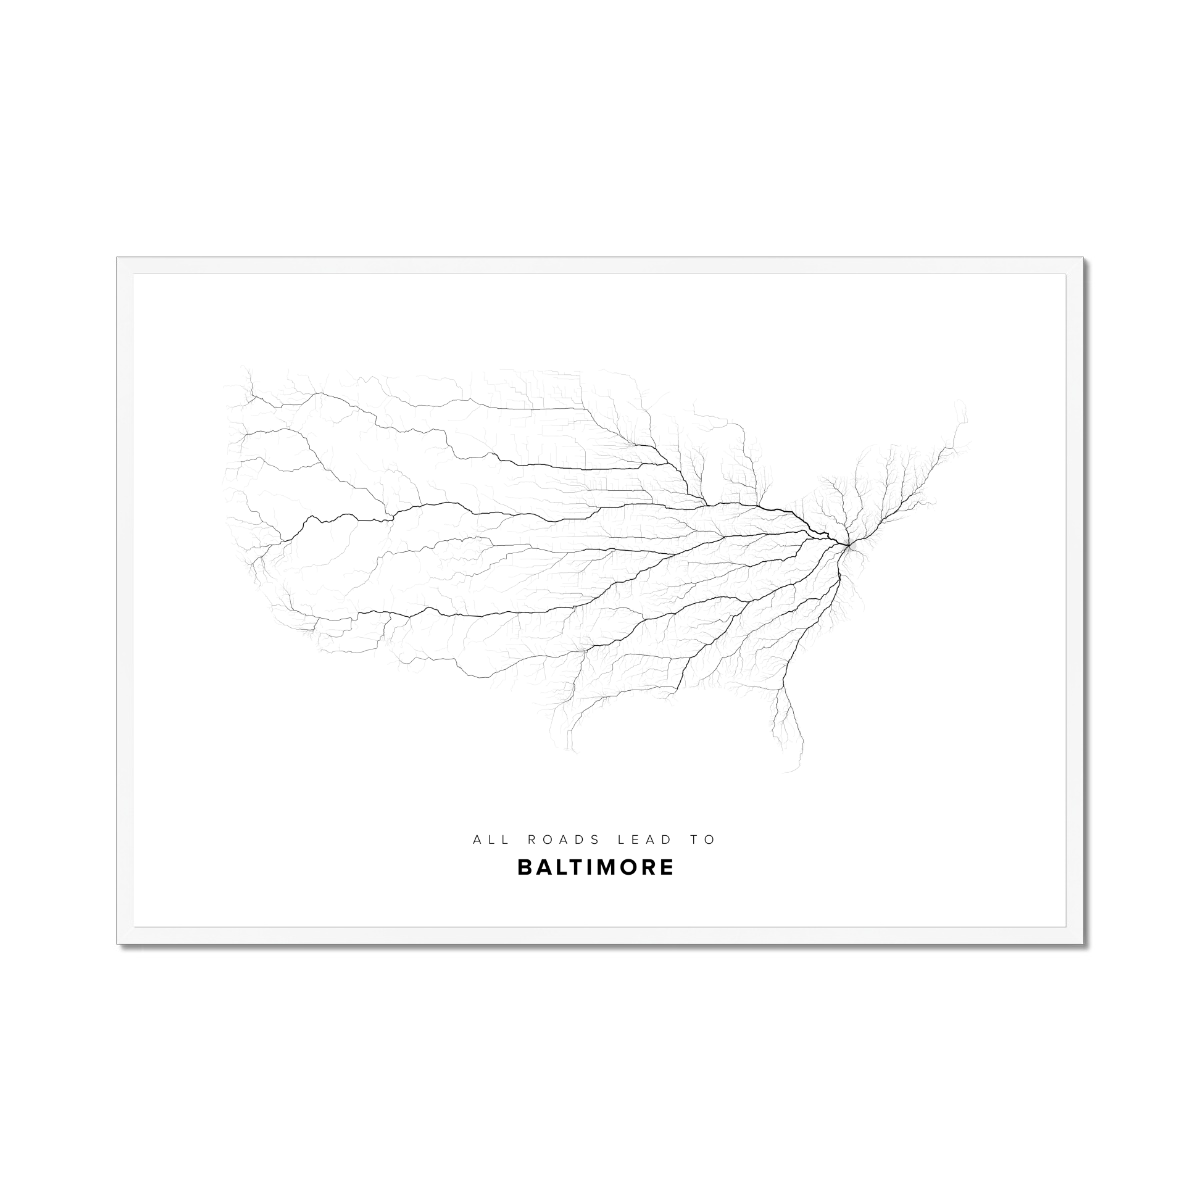 All roads lead to Baltimore (United States of America) Fine Art Map Print